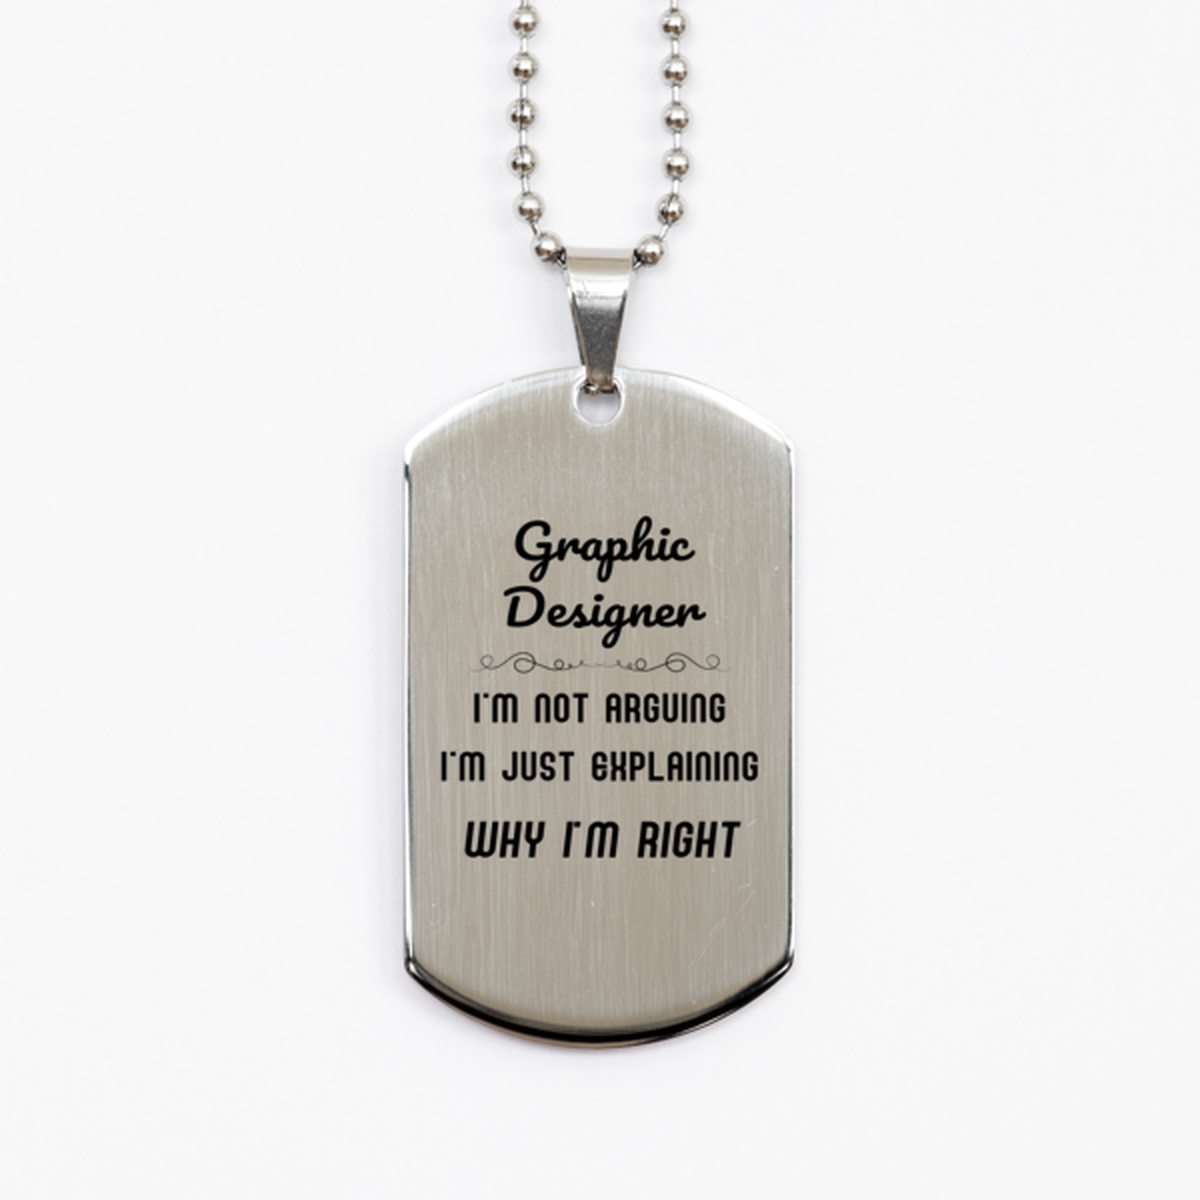 Graphic Designer I'm not Arguing. I'm Just Explaining Why I'm RIGHT Silver Dog Tag, Funny Saying Quote Graphic Designer Gifts For Graphic Designer Graduation Birthday Christmas Gifts for Men Women Coworker